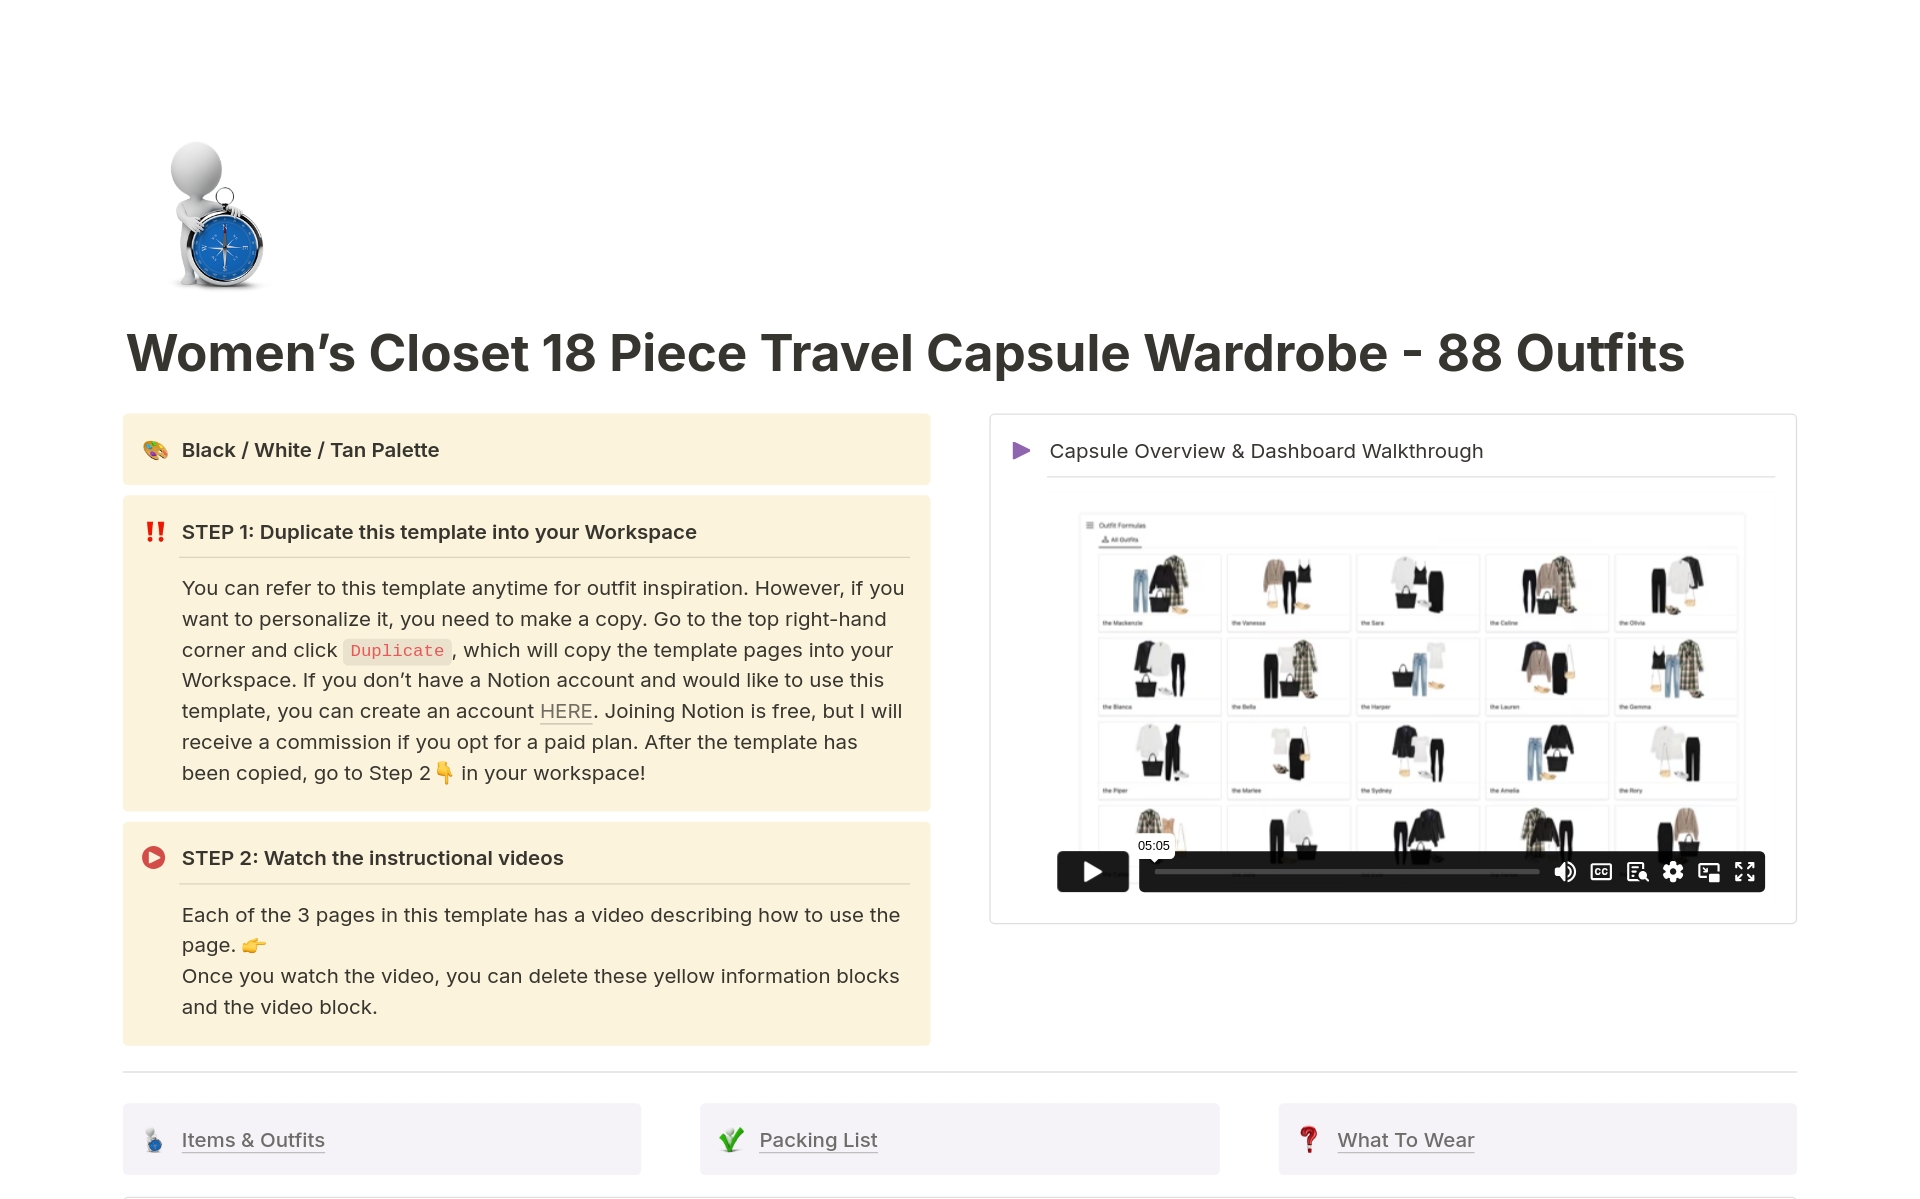 Always look fabulous on your next getaway with this travel capsule of 88 outfits. Features include a packing list, 'How To Wear' each item and a 'What To Wear' gallery for occasions. Plan your outfits before your trip or use the outfit formulas as inspiration at your destination.